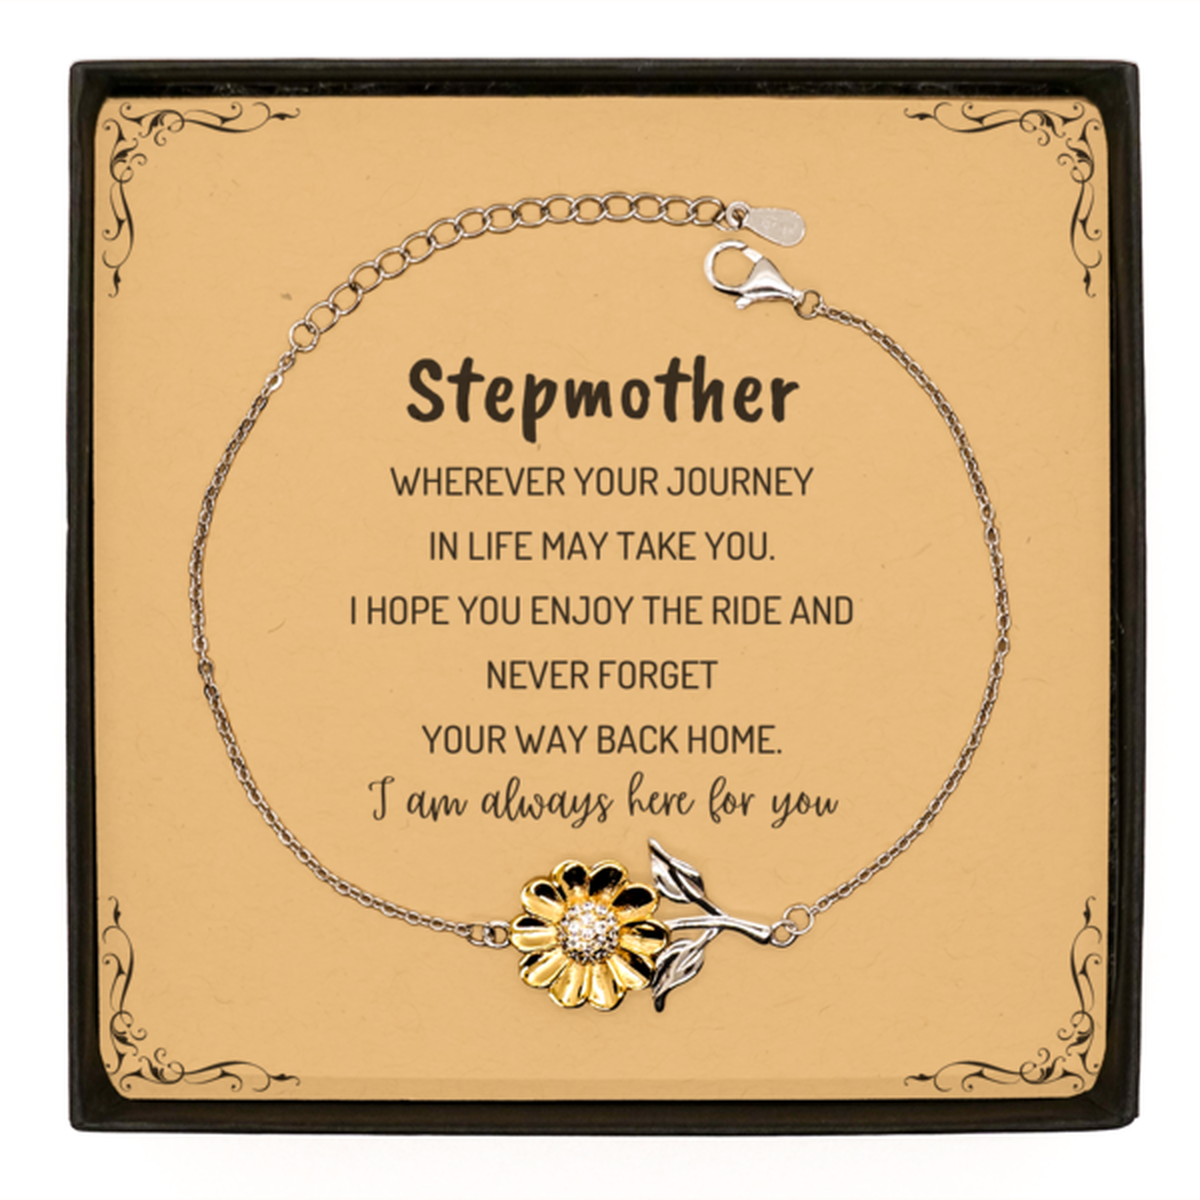 Stepmother wherever your journey in life may take you, I am always here for you Stepmother Sunflower Bracelet, Awesome Christmas Gifts For Stepmother Message Card, Stepmother Birthday Gifts for Men Women Family Loved One